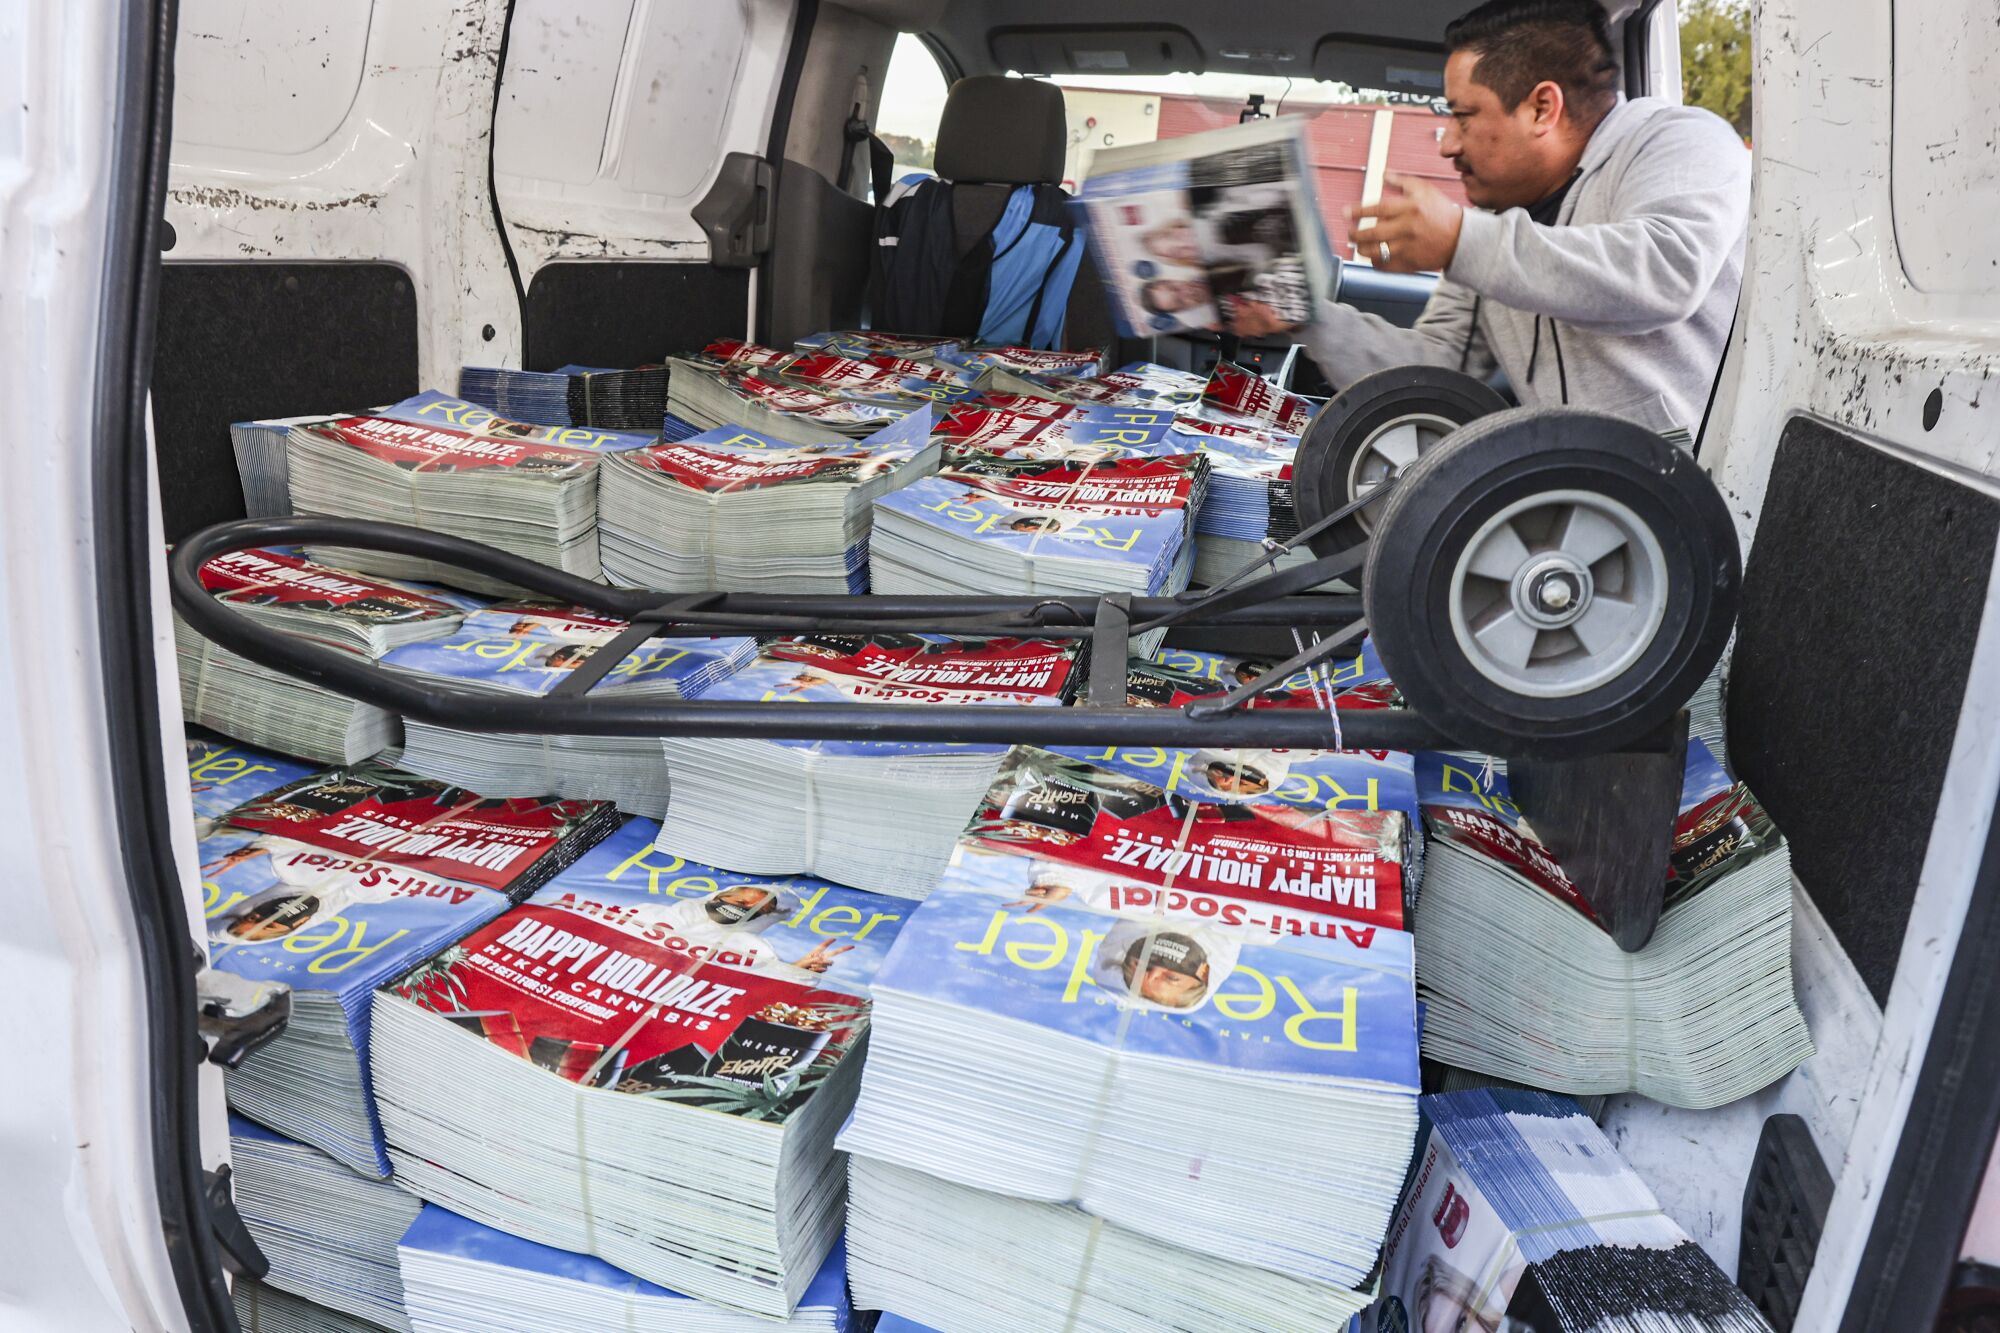 Delivery workers load copies of the San Diego Reader at Price Self Storage.